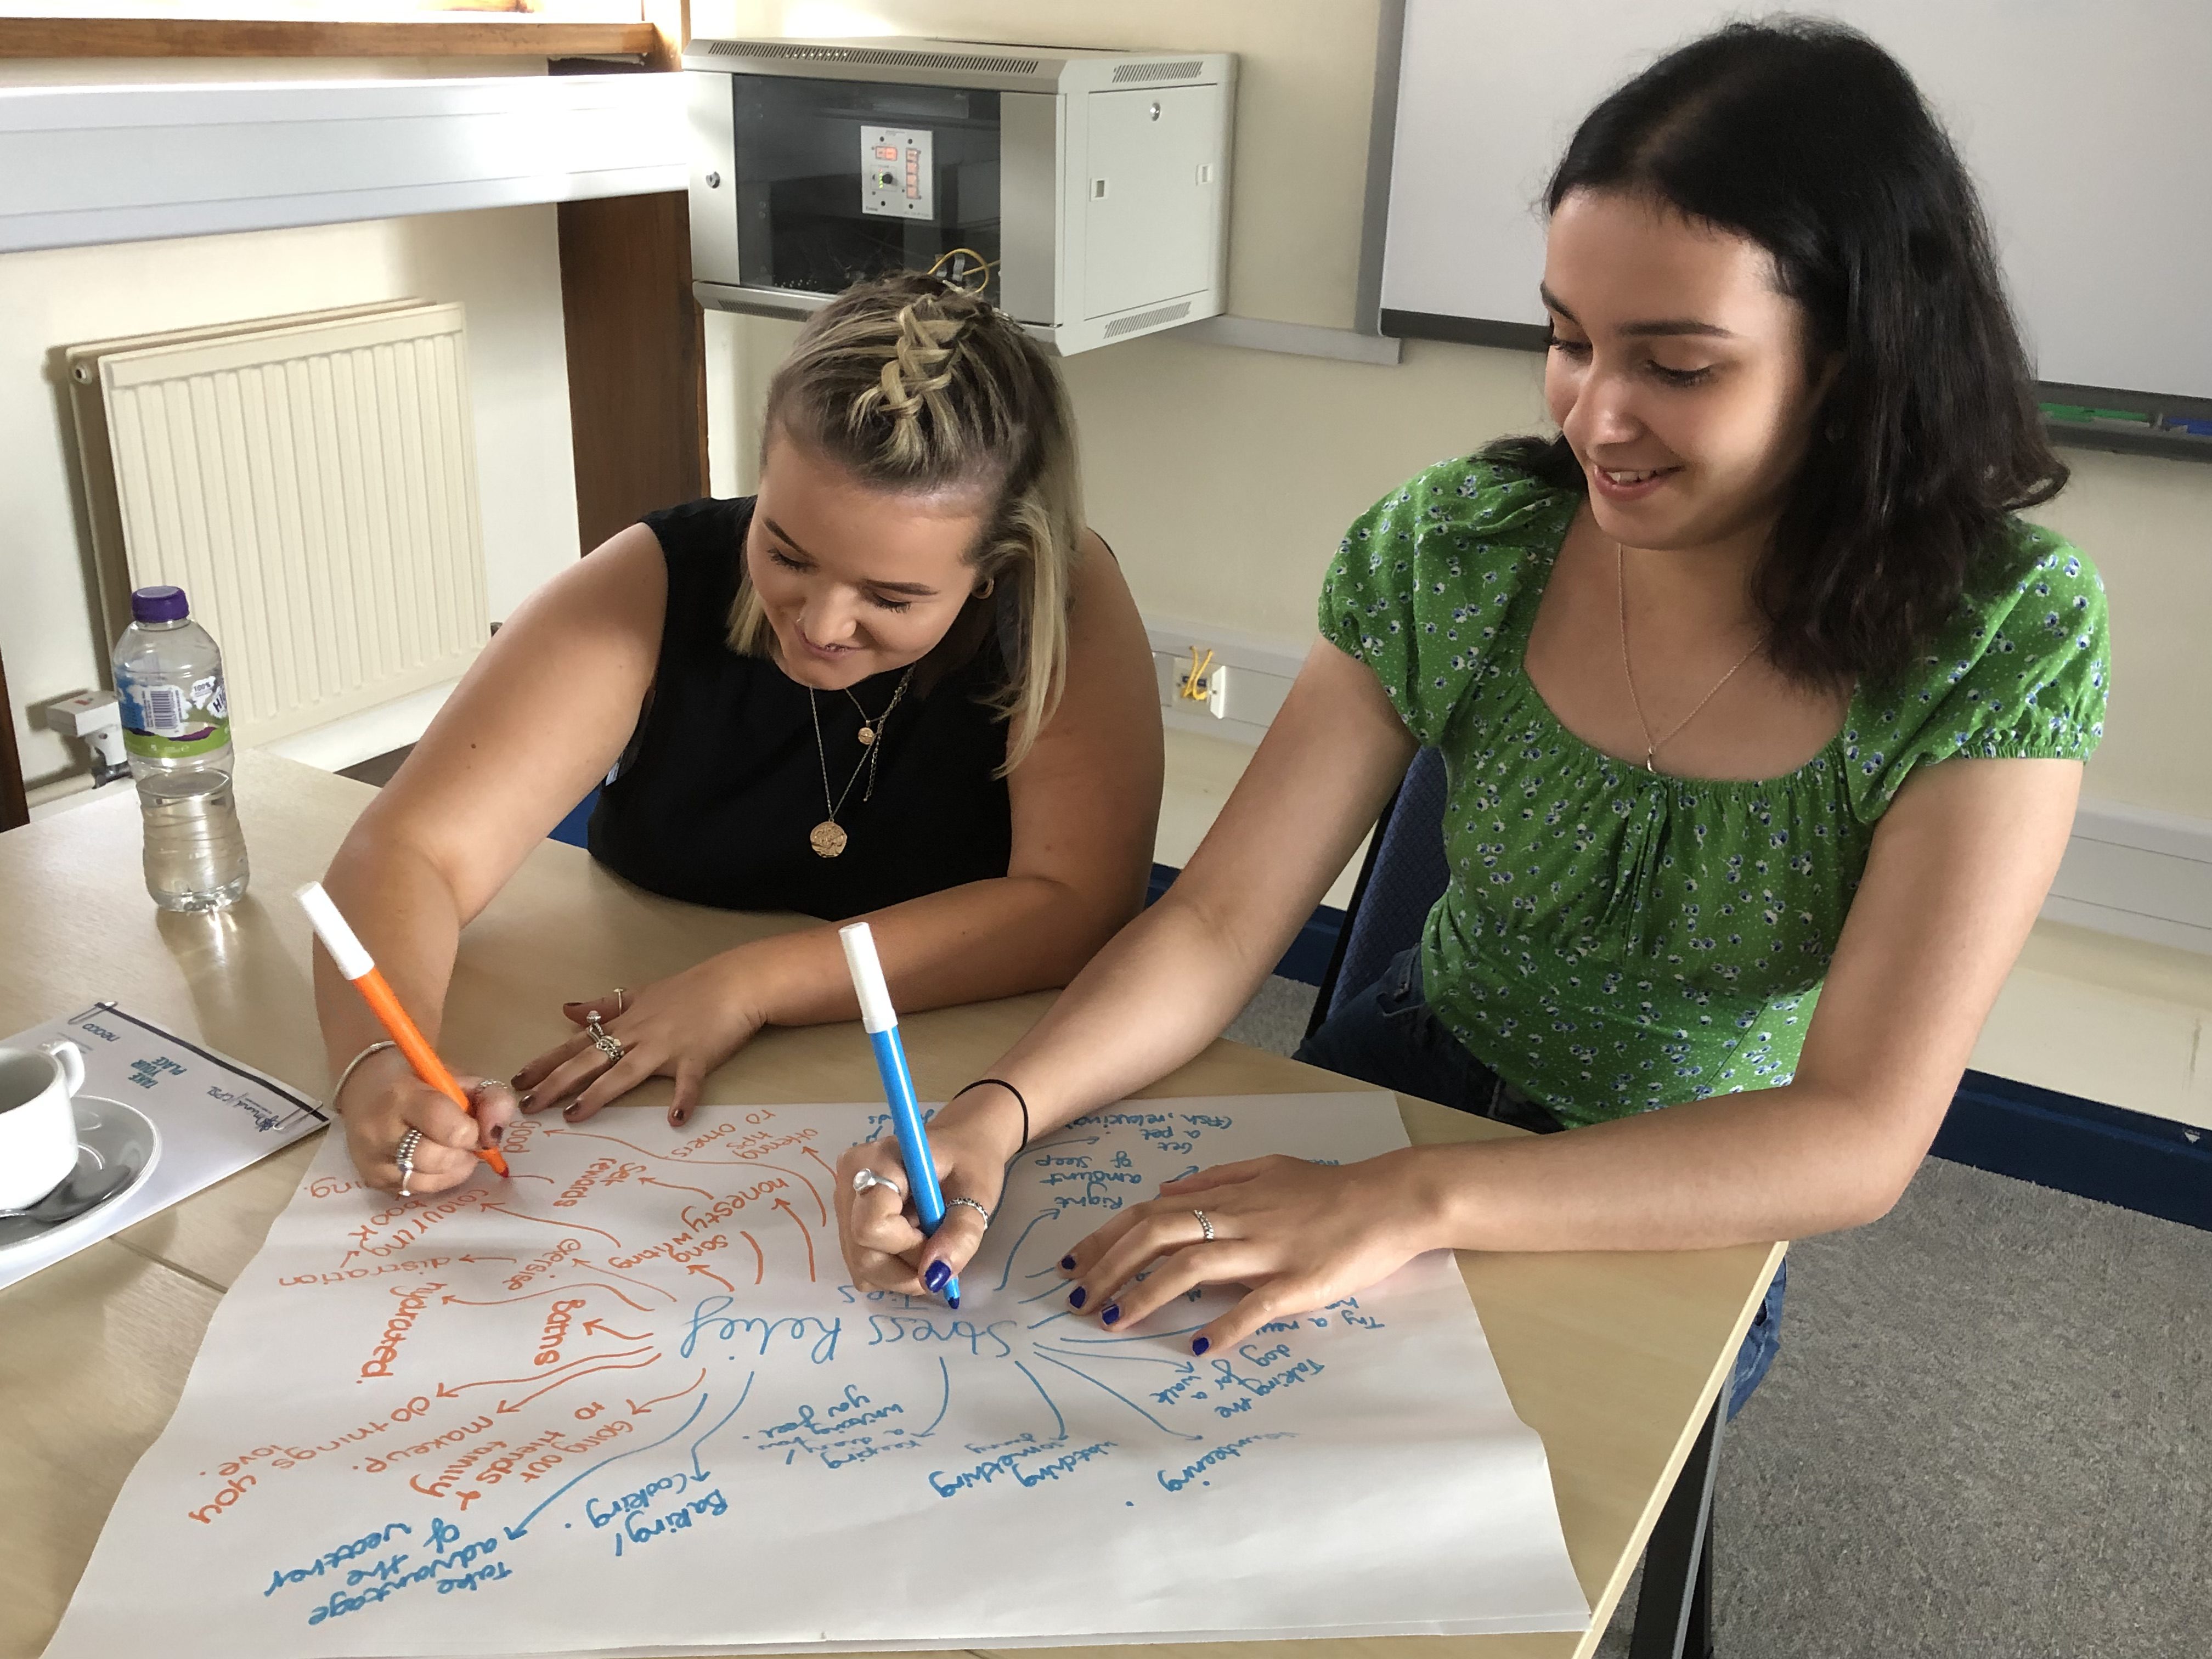 Two women drawing a Stress Relief spider diagram on a piece of paper